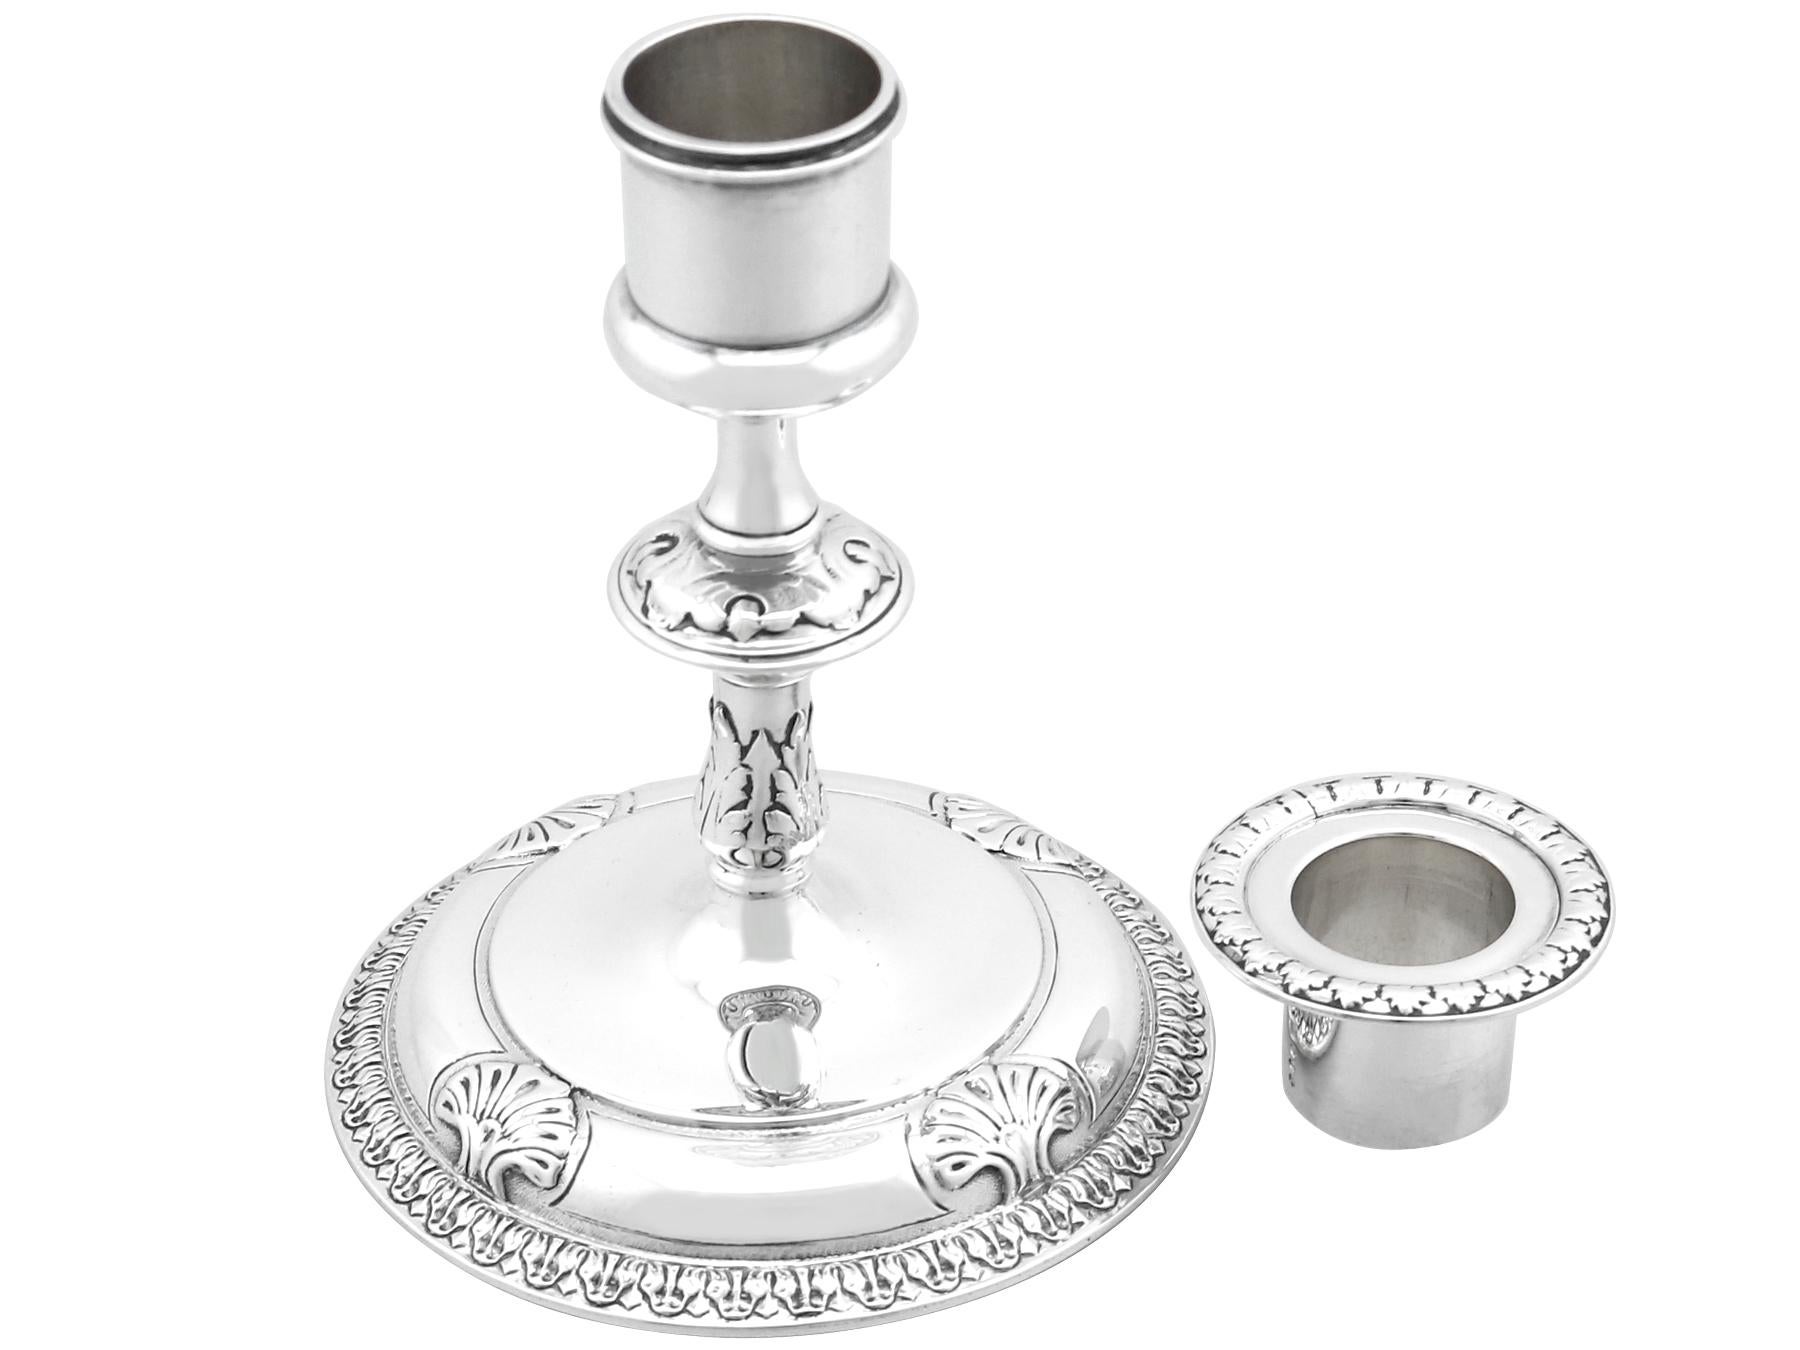 Antique Victorian Sterling Silver Piano Candle Holders In Excellent Condition For Sale In Jesmond, Newcastle Upon Tyne